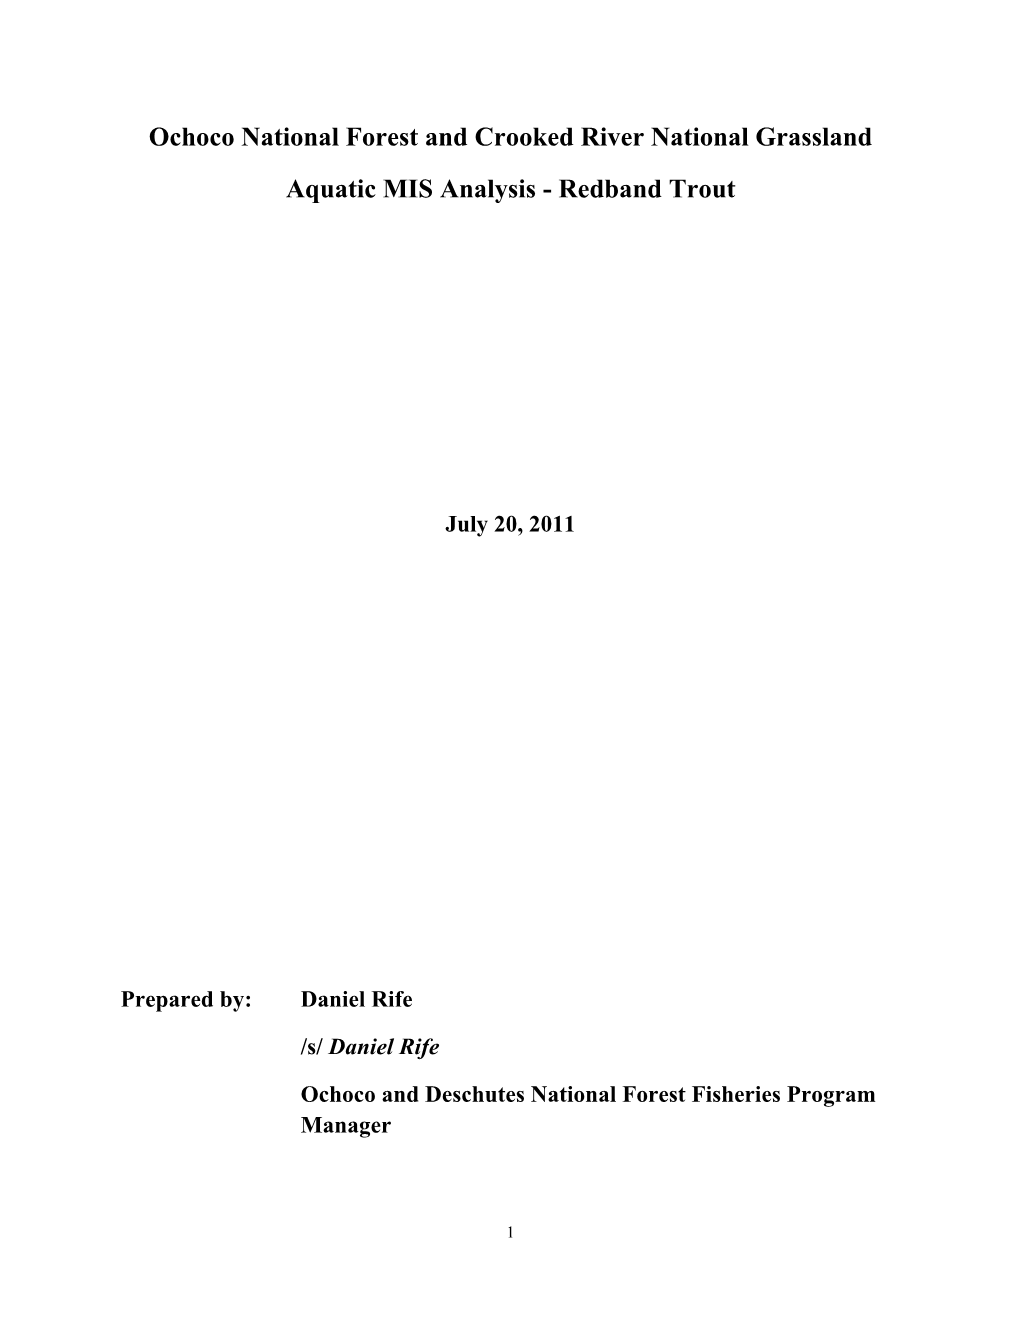 Ochoco National Forest and Crooked River National Grassland Aquatic MIS Analysis - Redband Trout